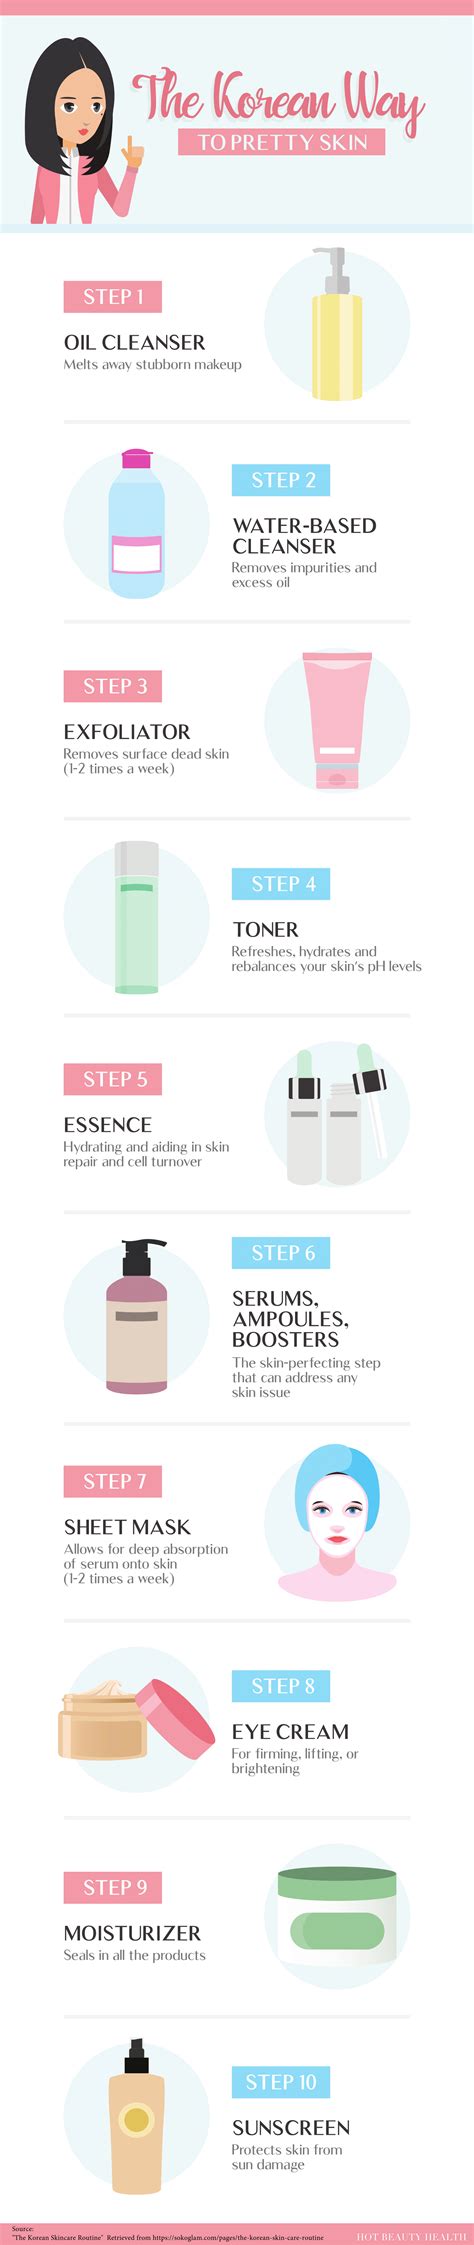 Korean 10 Step Skin Care Routine These Are The Best Skin Care Hacks